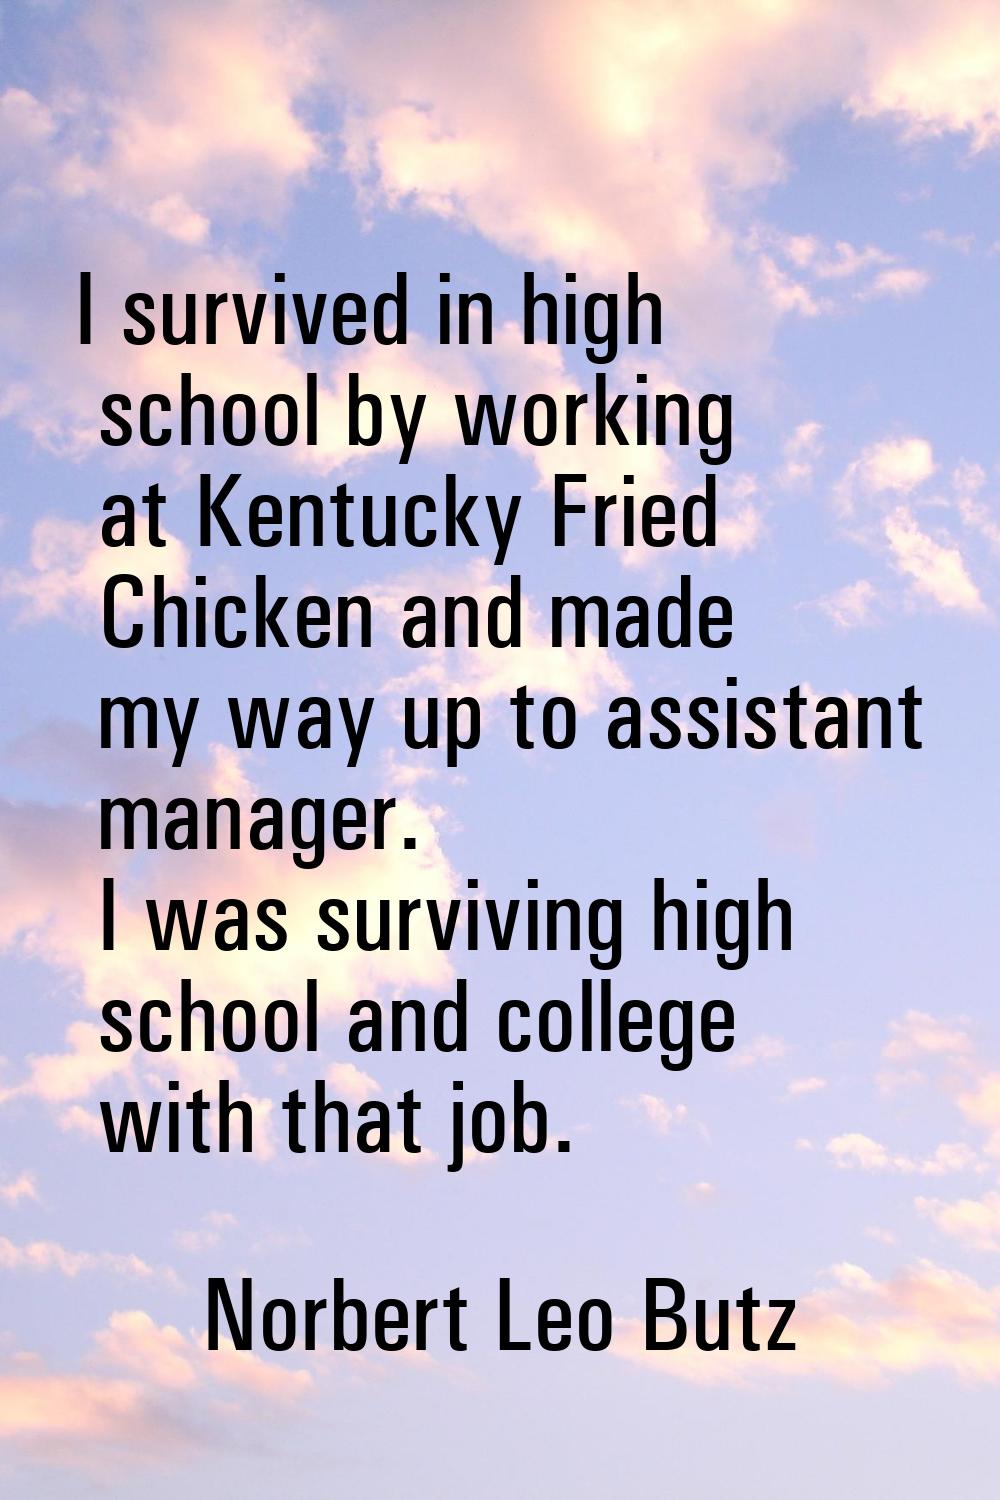 I survived in high school by working at Kentucky Fried Chicken and made my way up to assistant mana